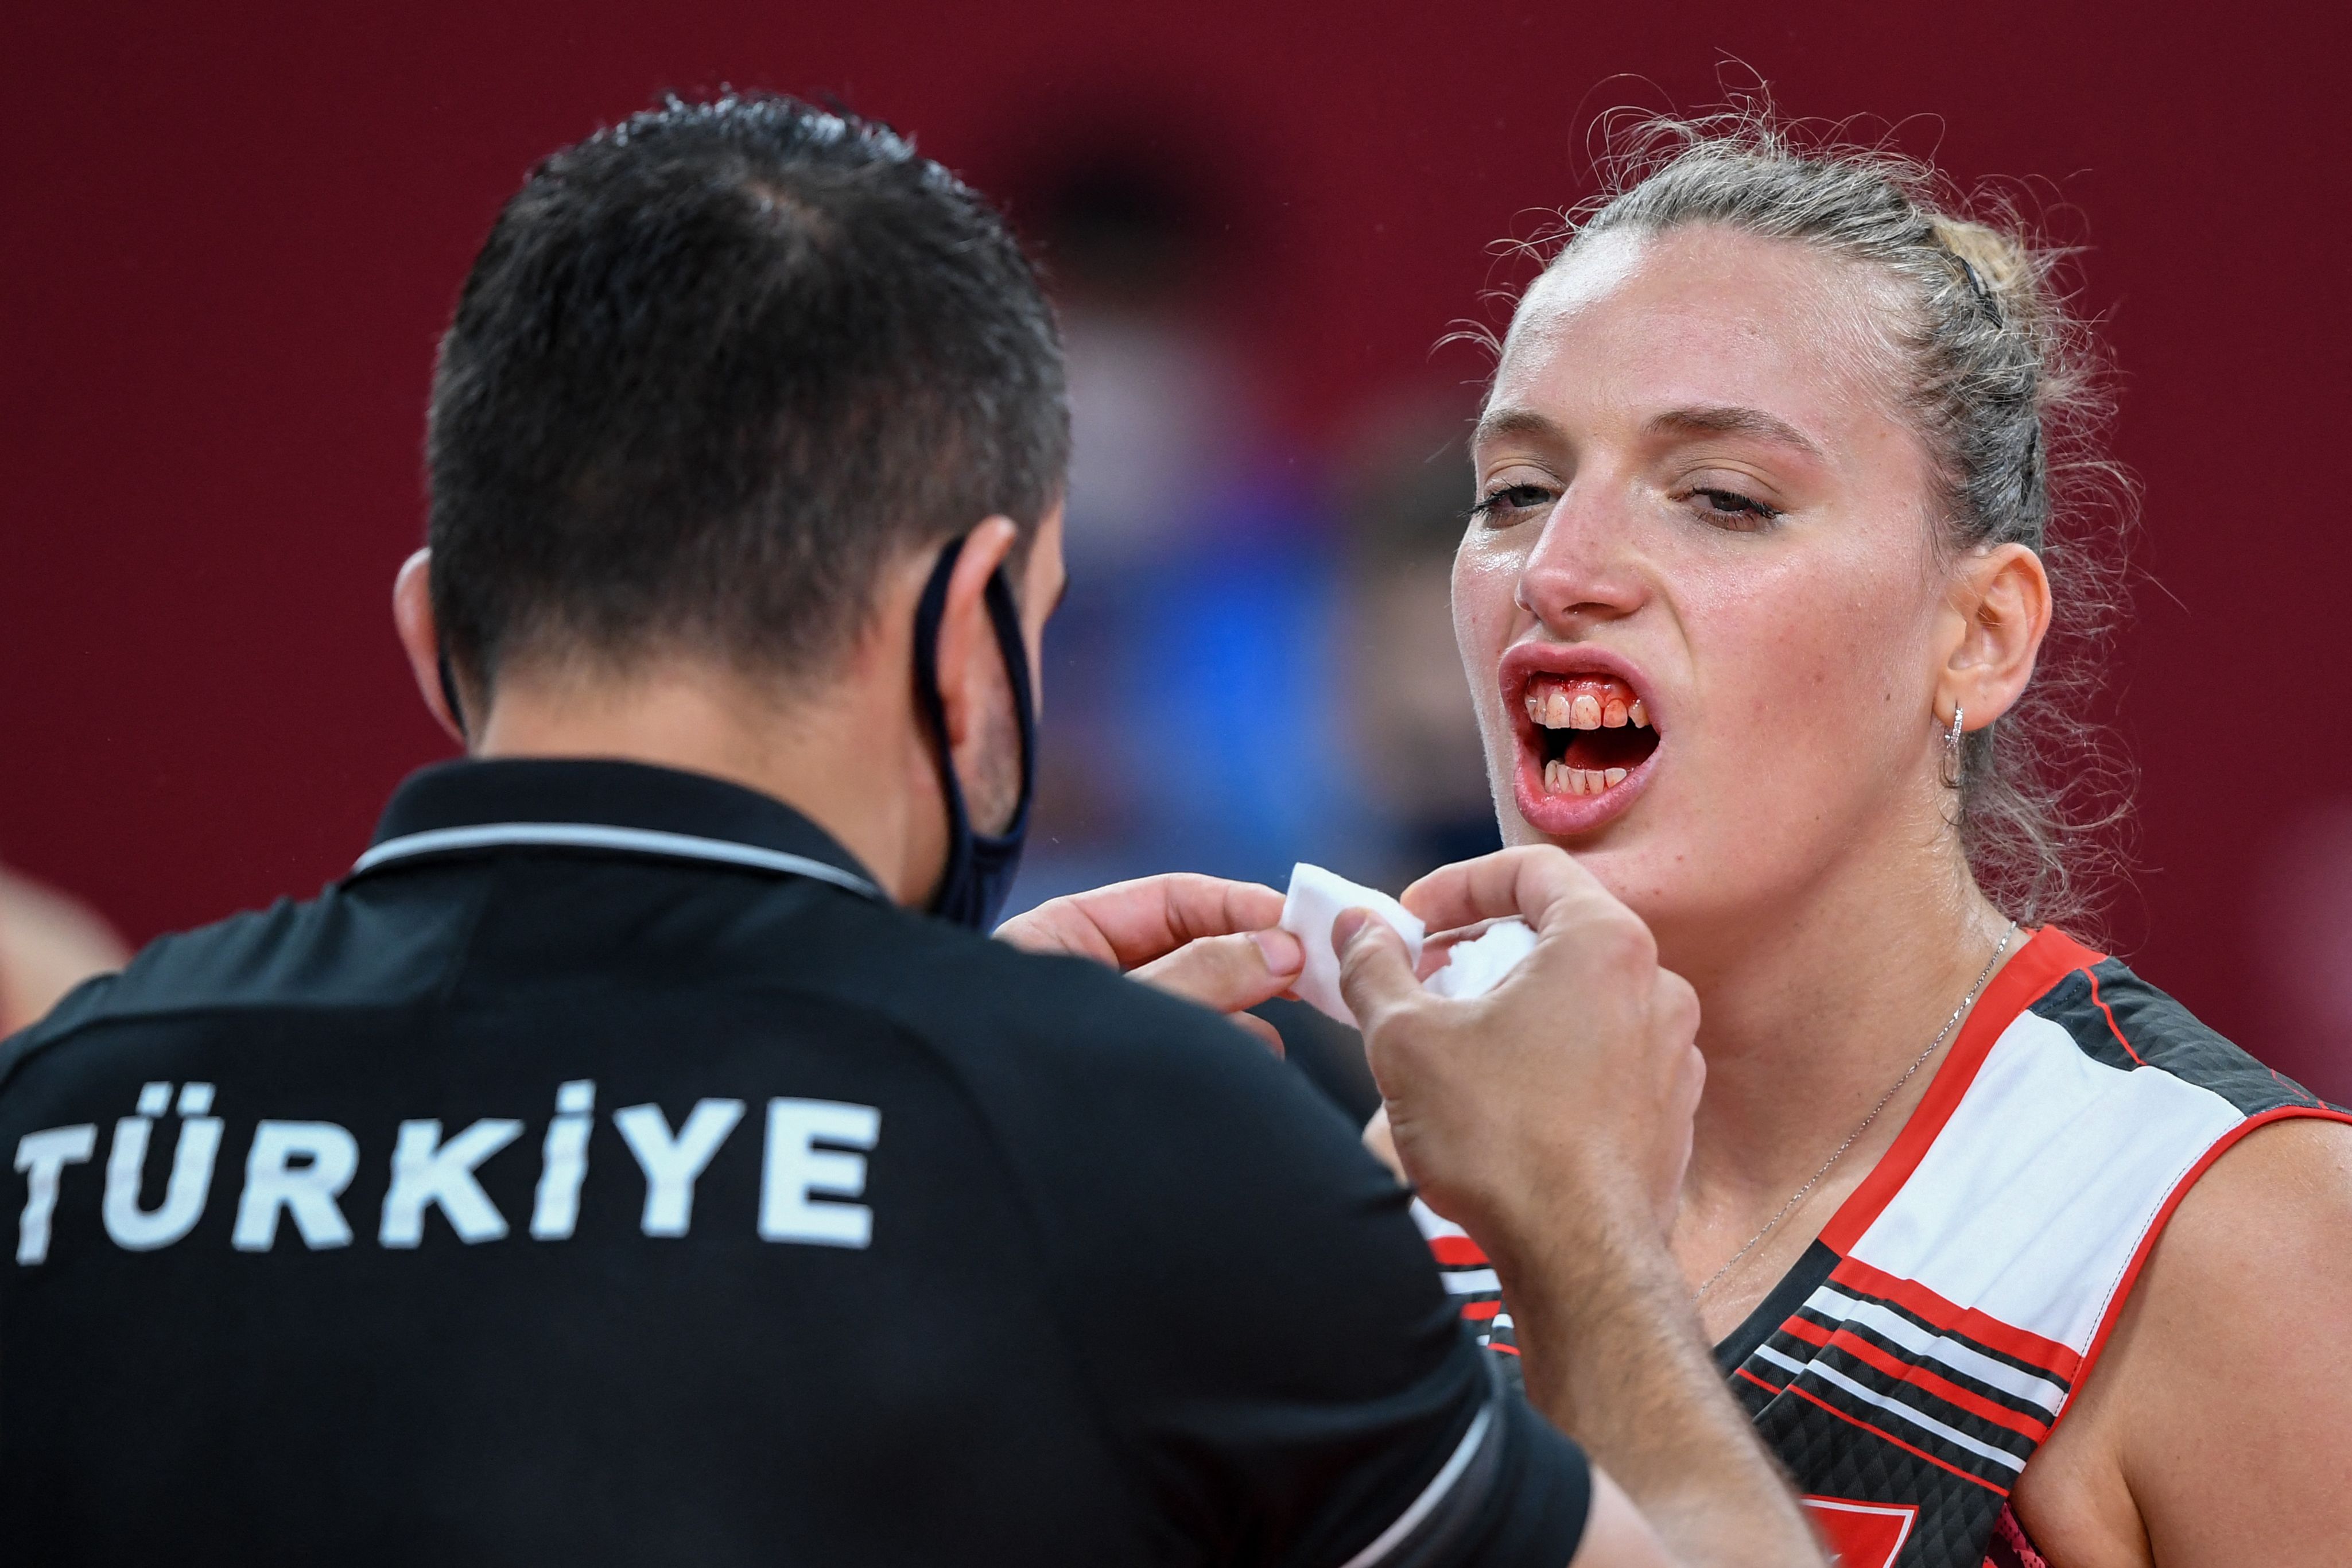 Turkish womens volleyball players power through after an ugly head-to-head collision